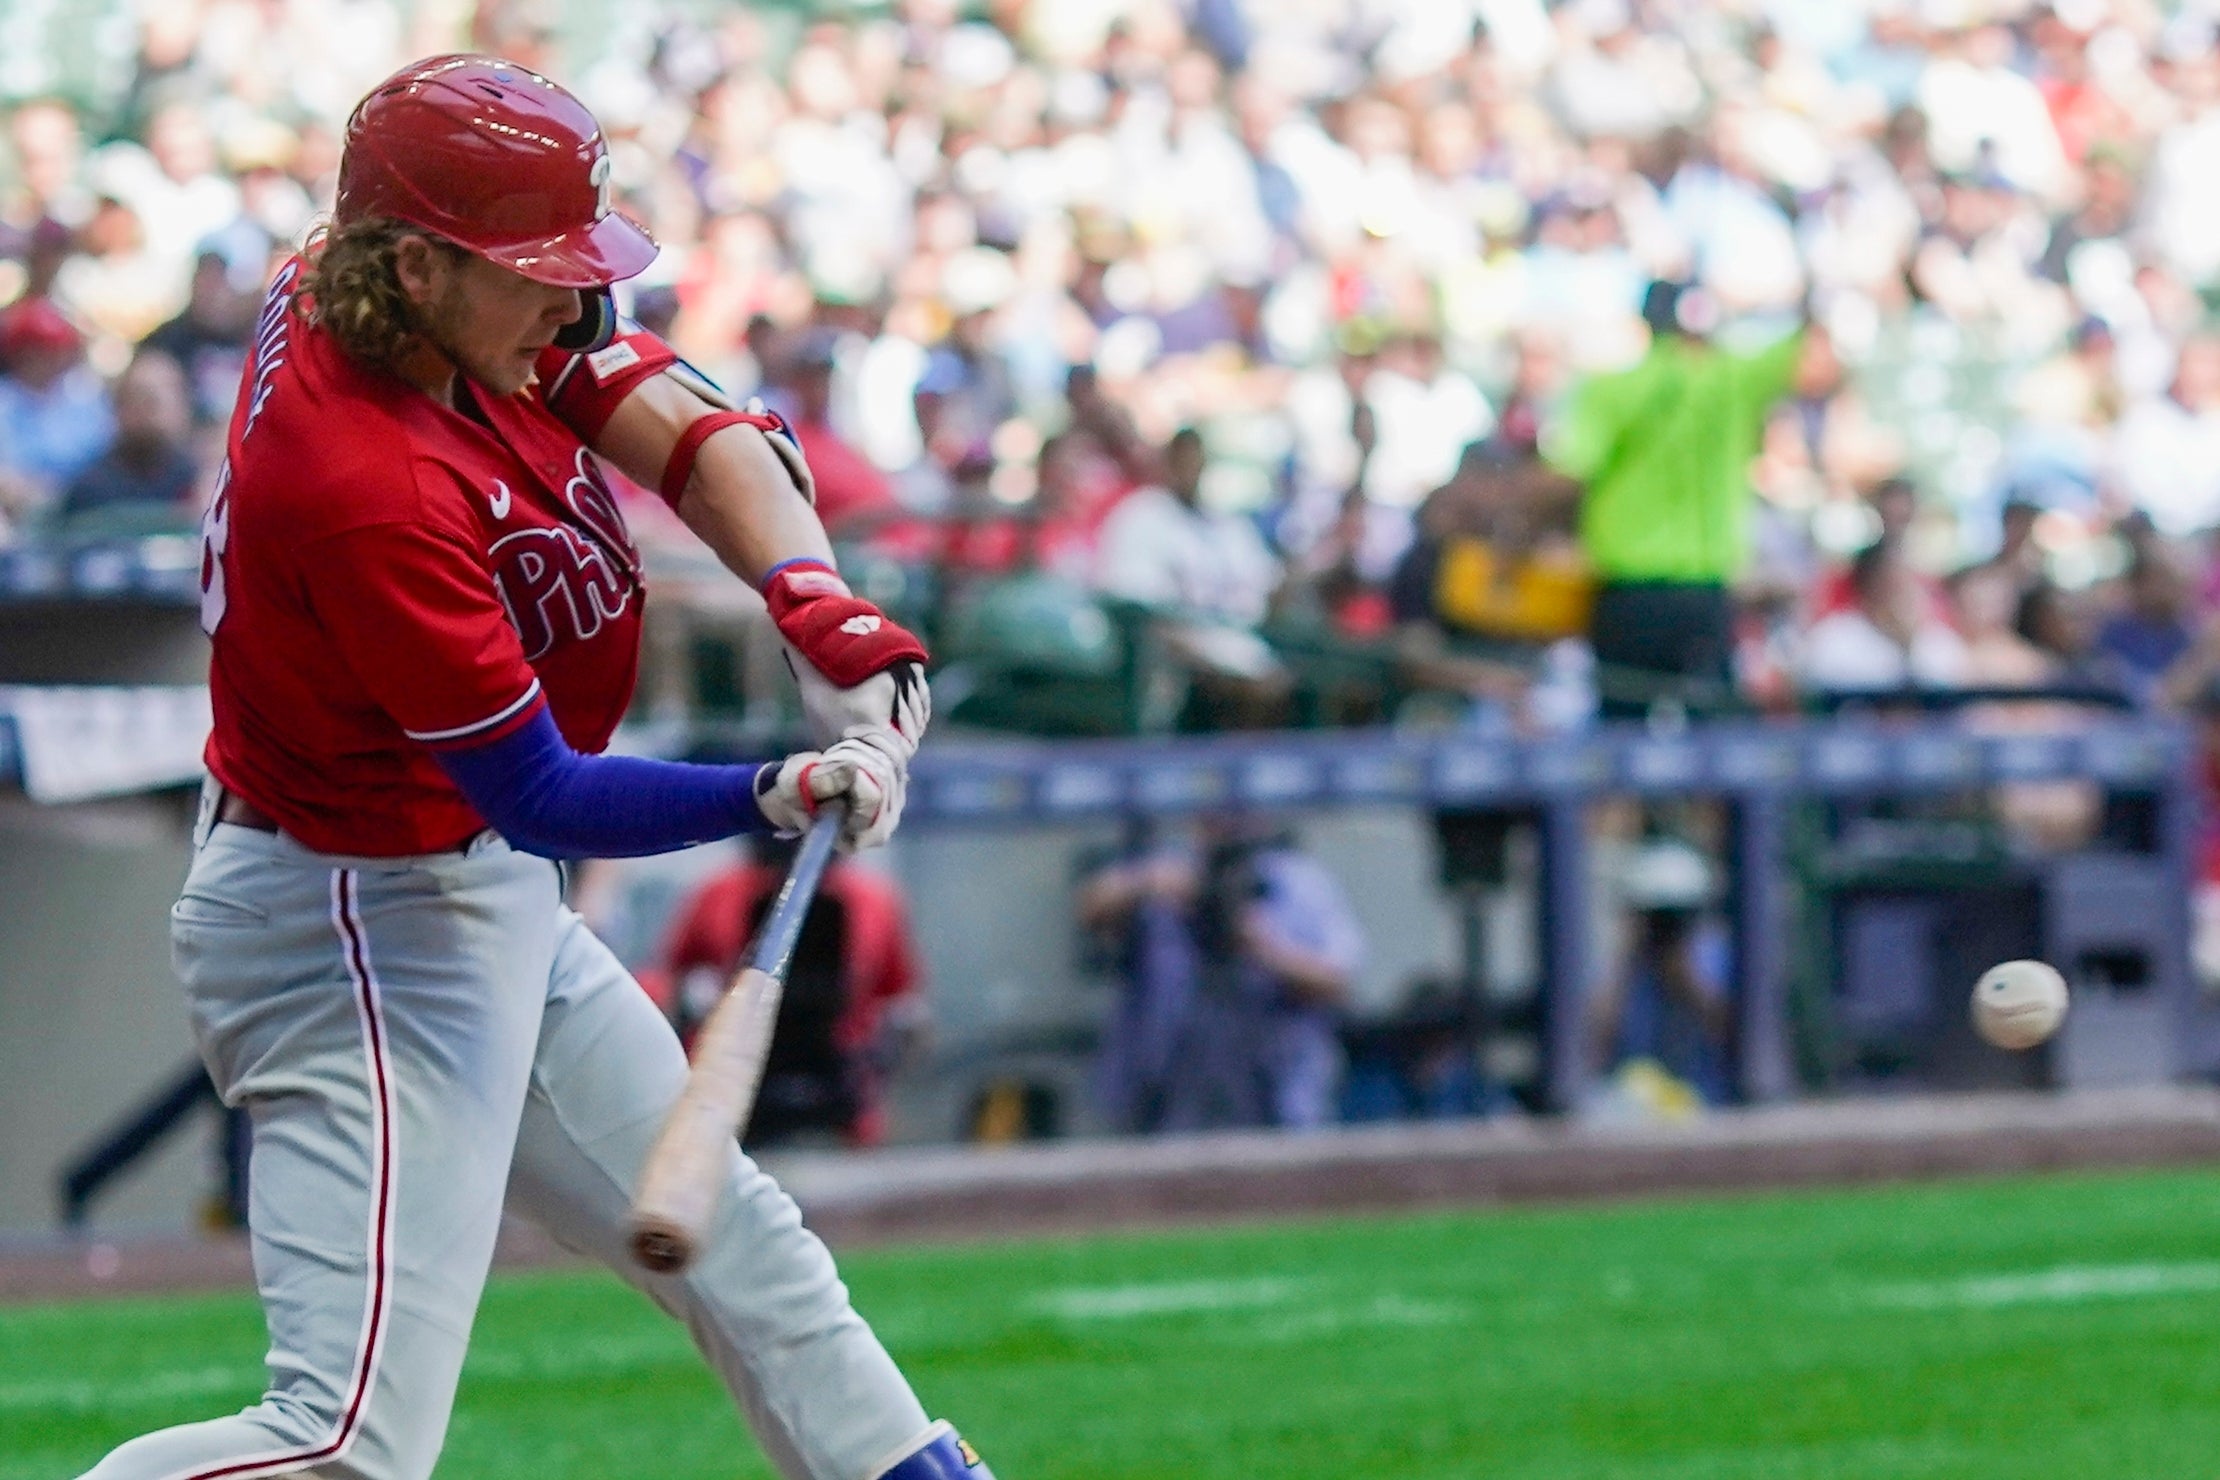 Bryce Harper homers in the 7th inning and leads the playoff-bound